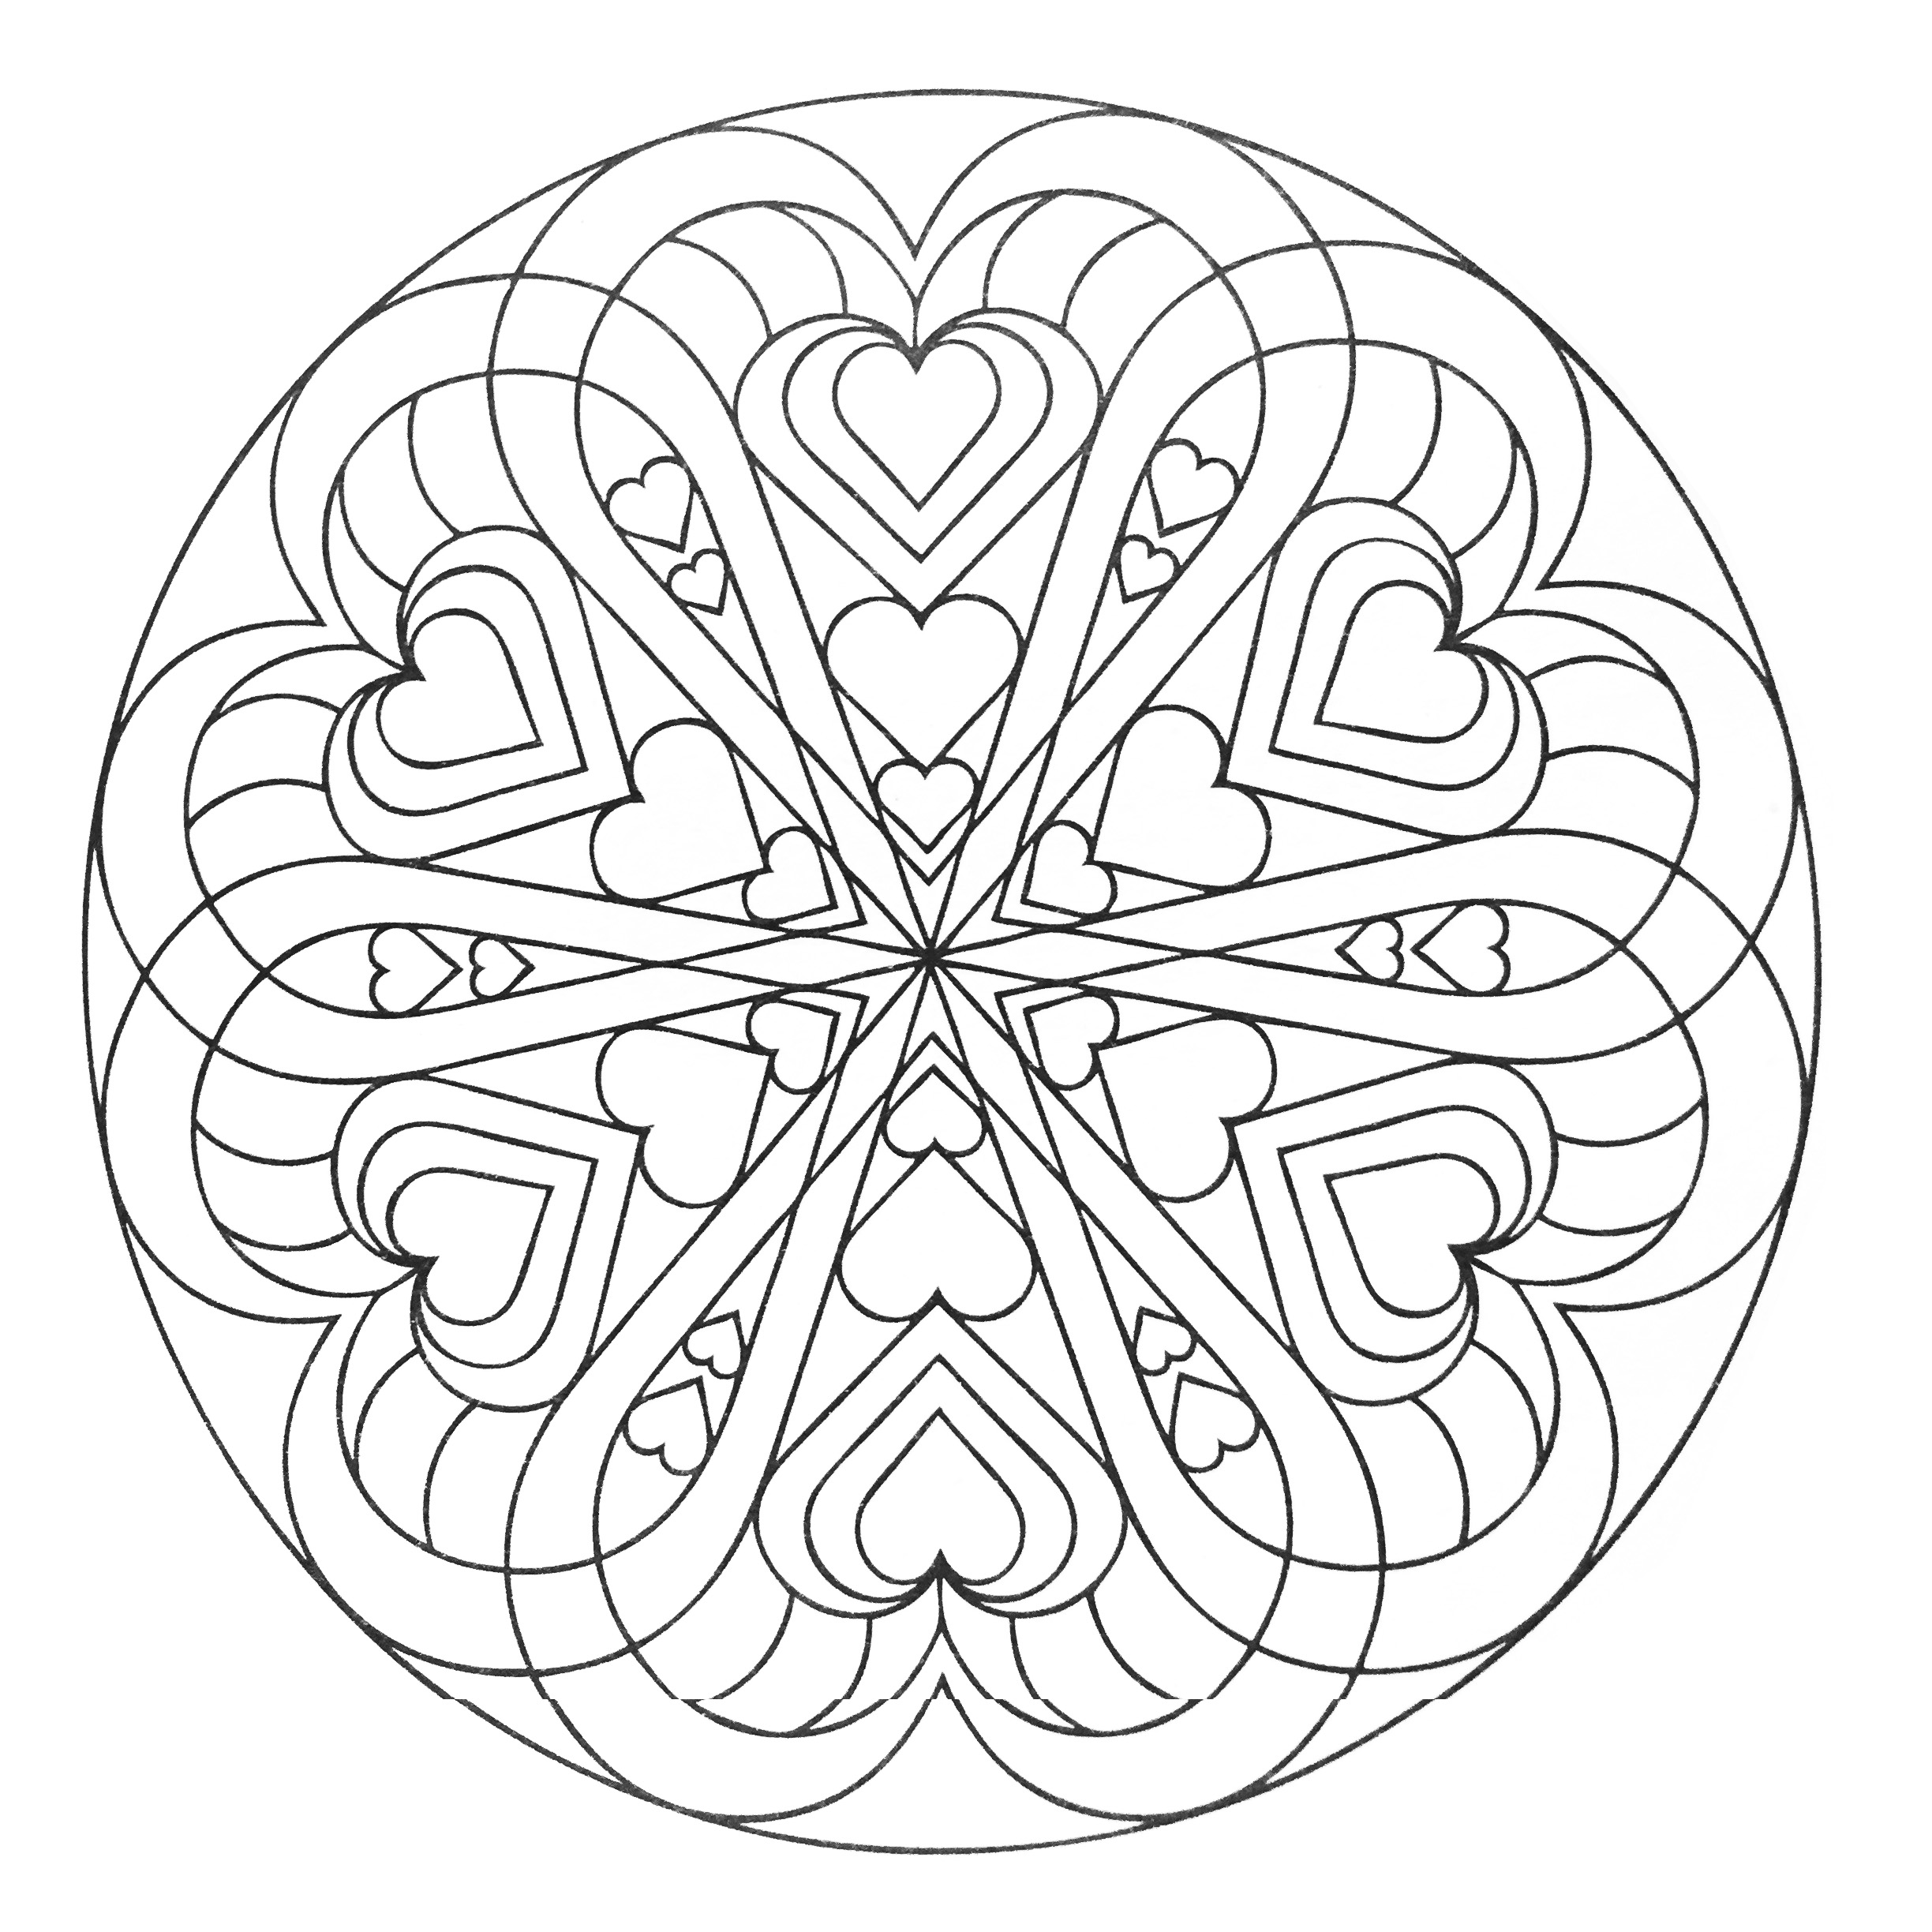 When coloring can really relax you ... This is the case with this Mandala coloring page of high quality.